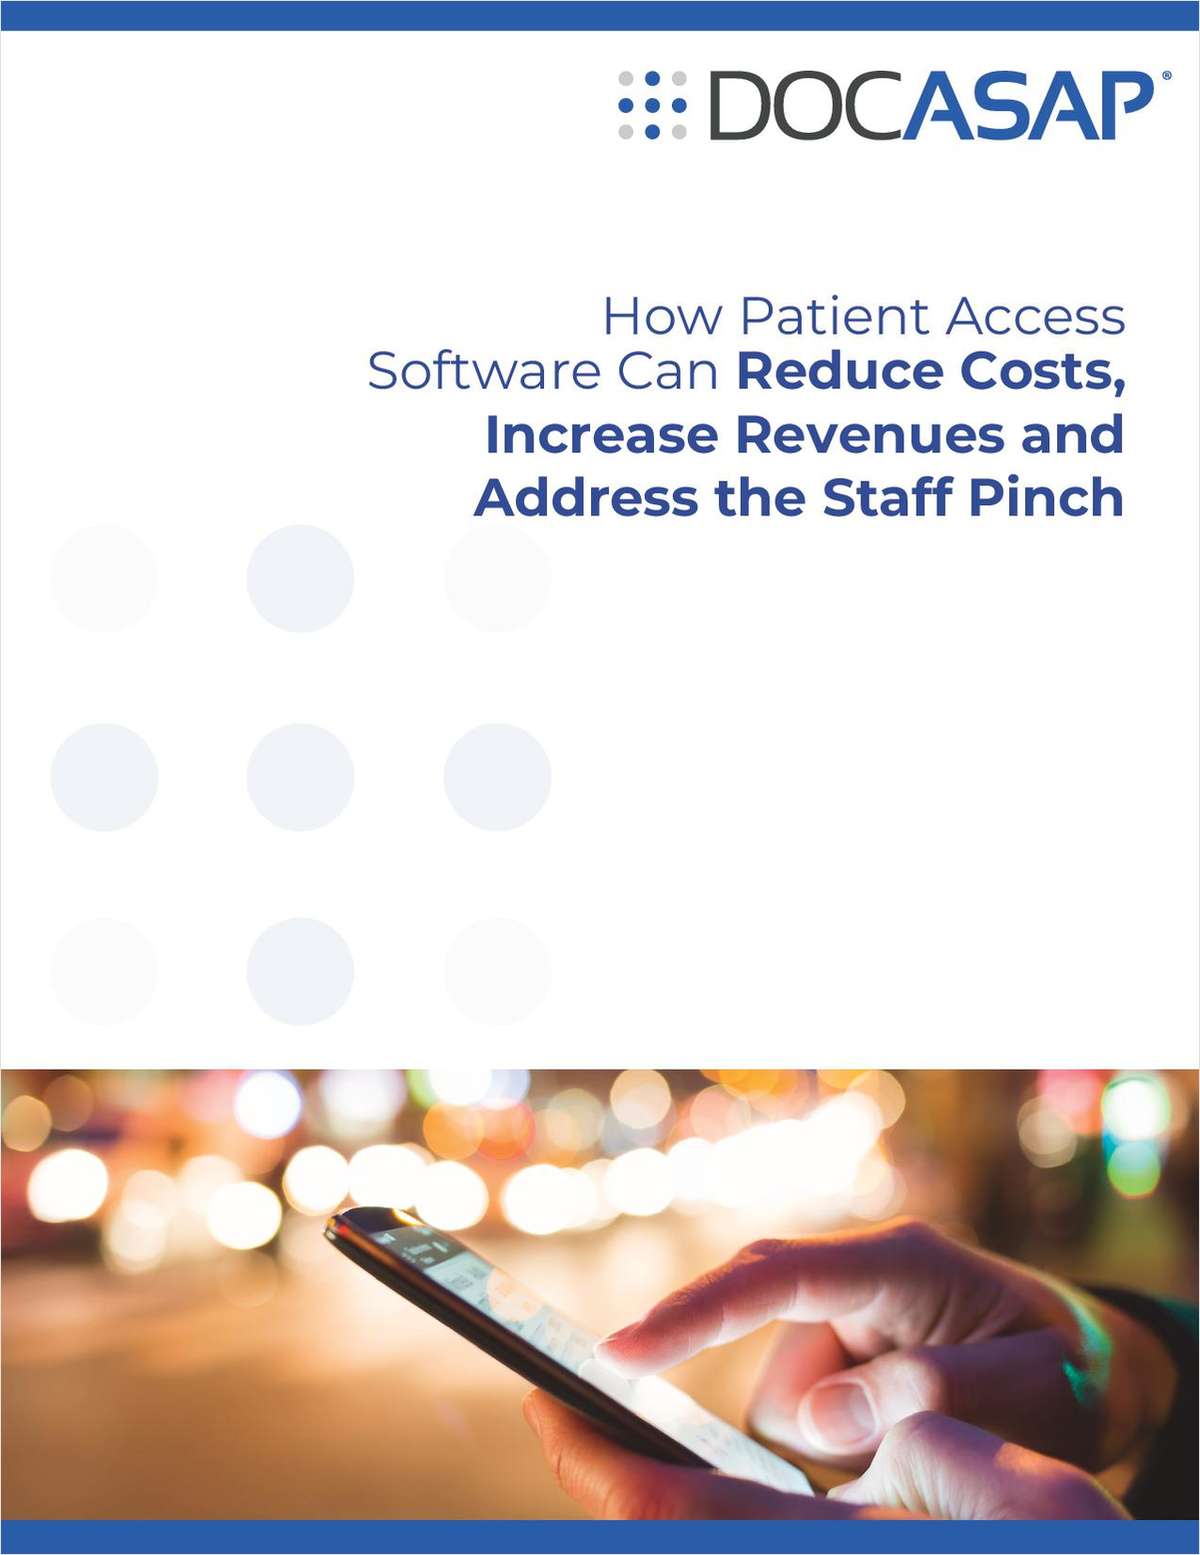 How Patient Access Software Can Reduce Costs, Increase Revenues and Address the Staff Pinch